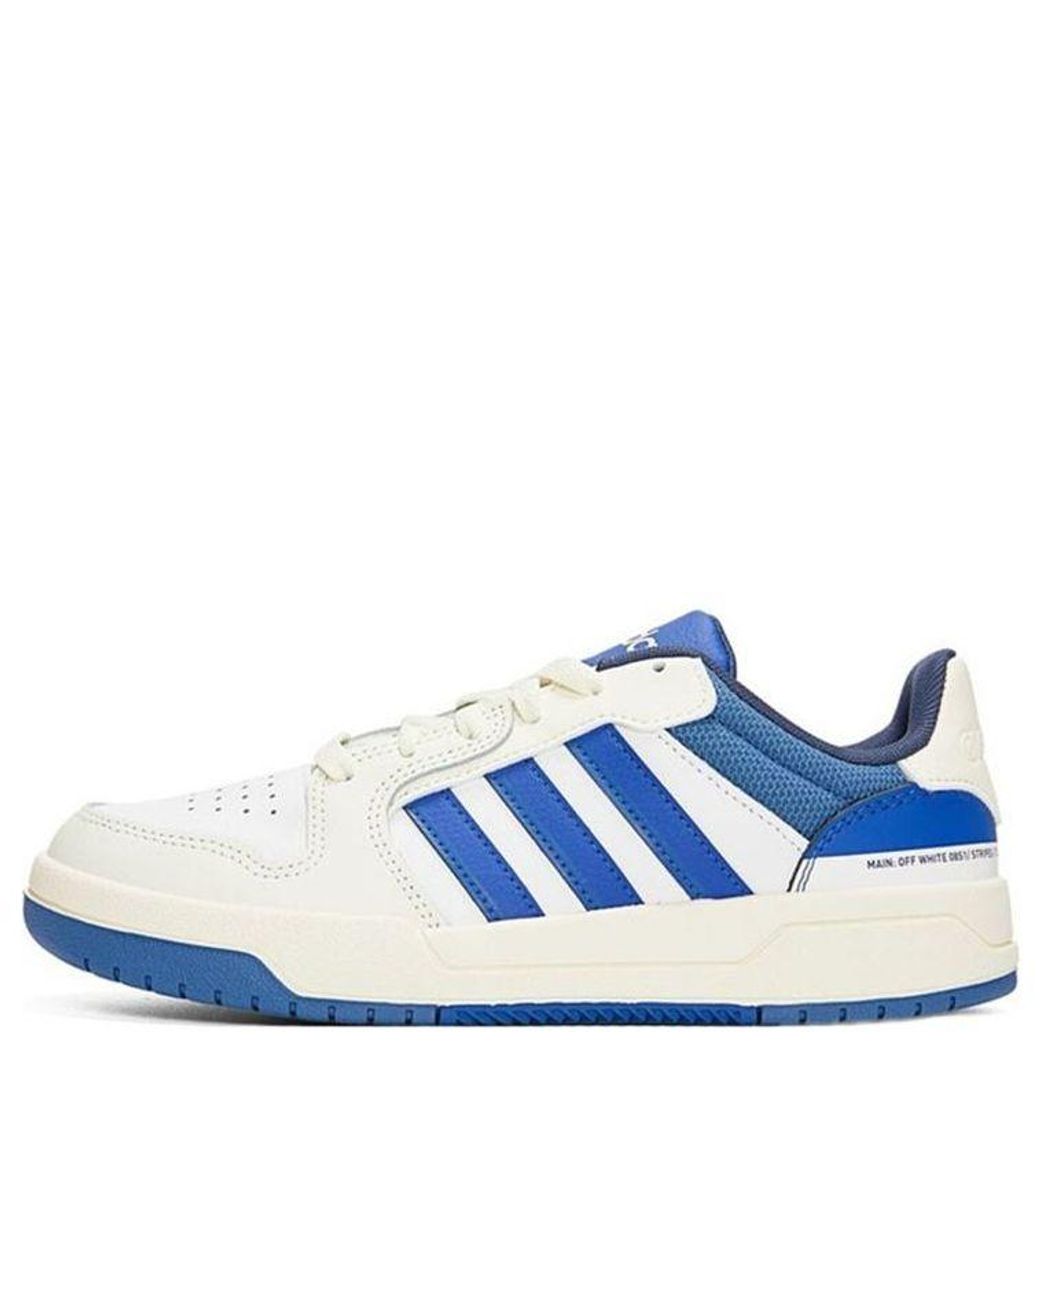 Adidas Neo Entrap Sneakers White/blue | Lyst